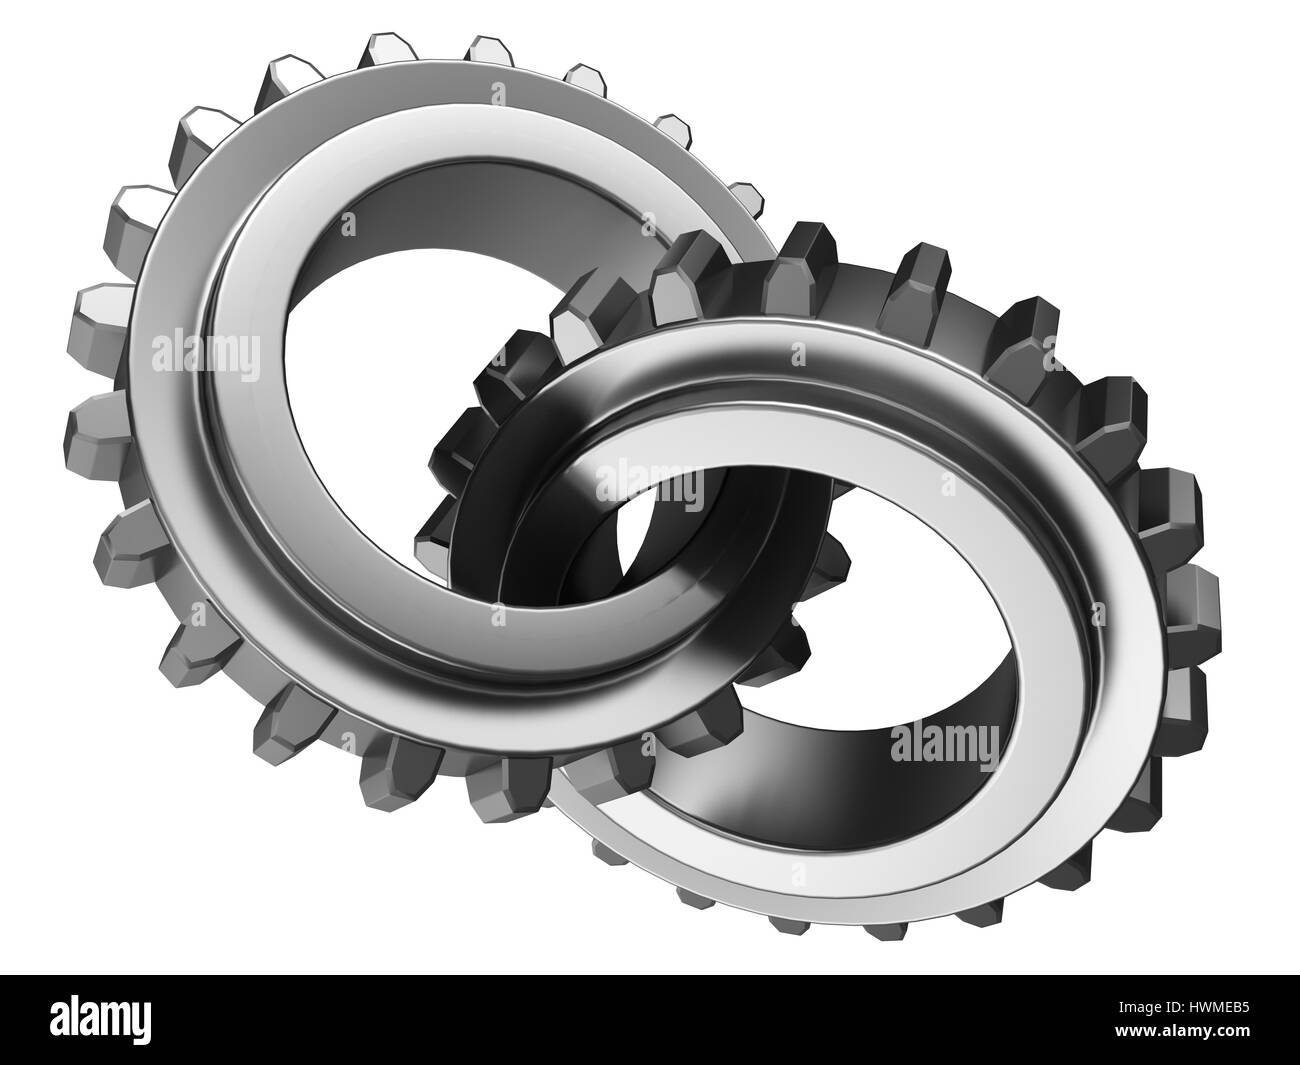 3d illustration of two gear wheels Stock Photo